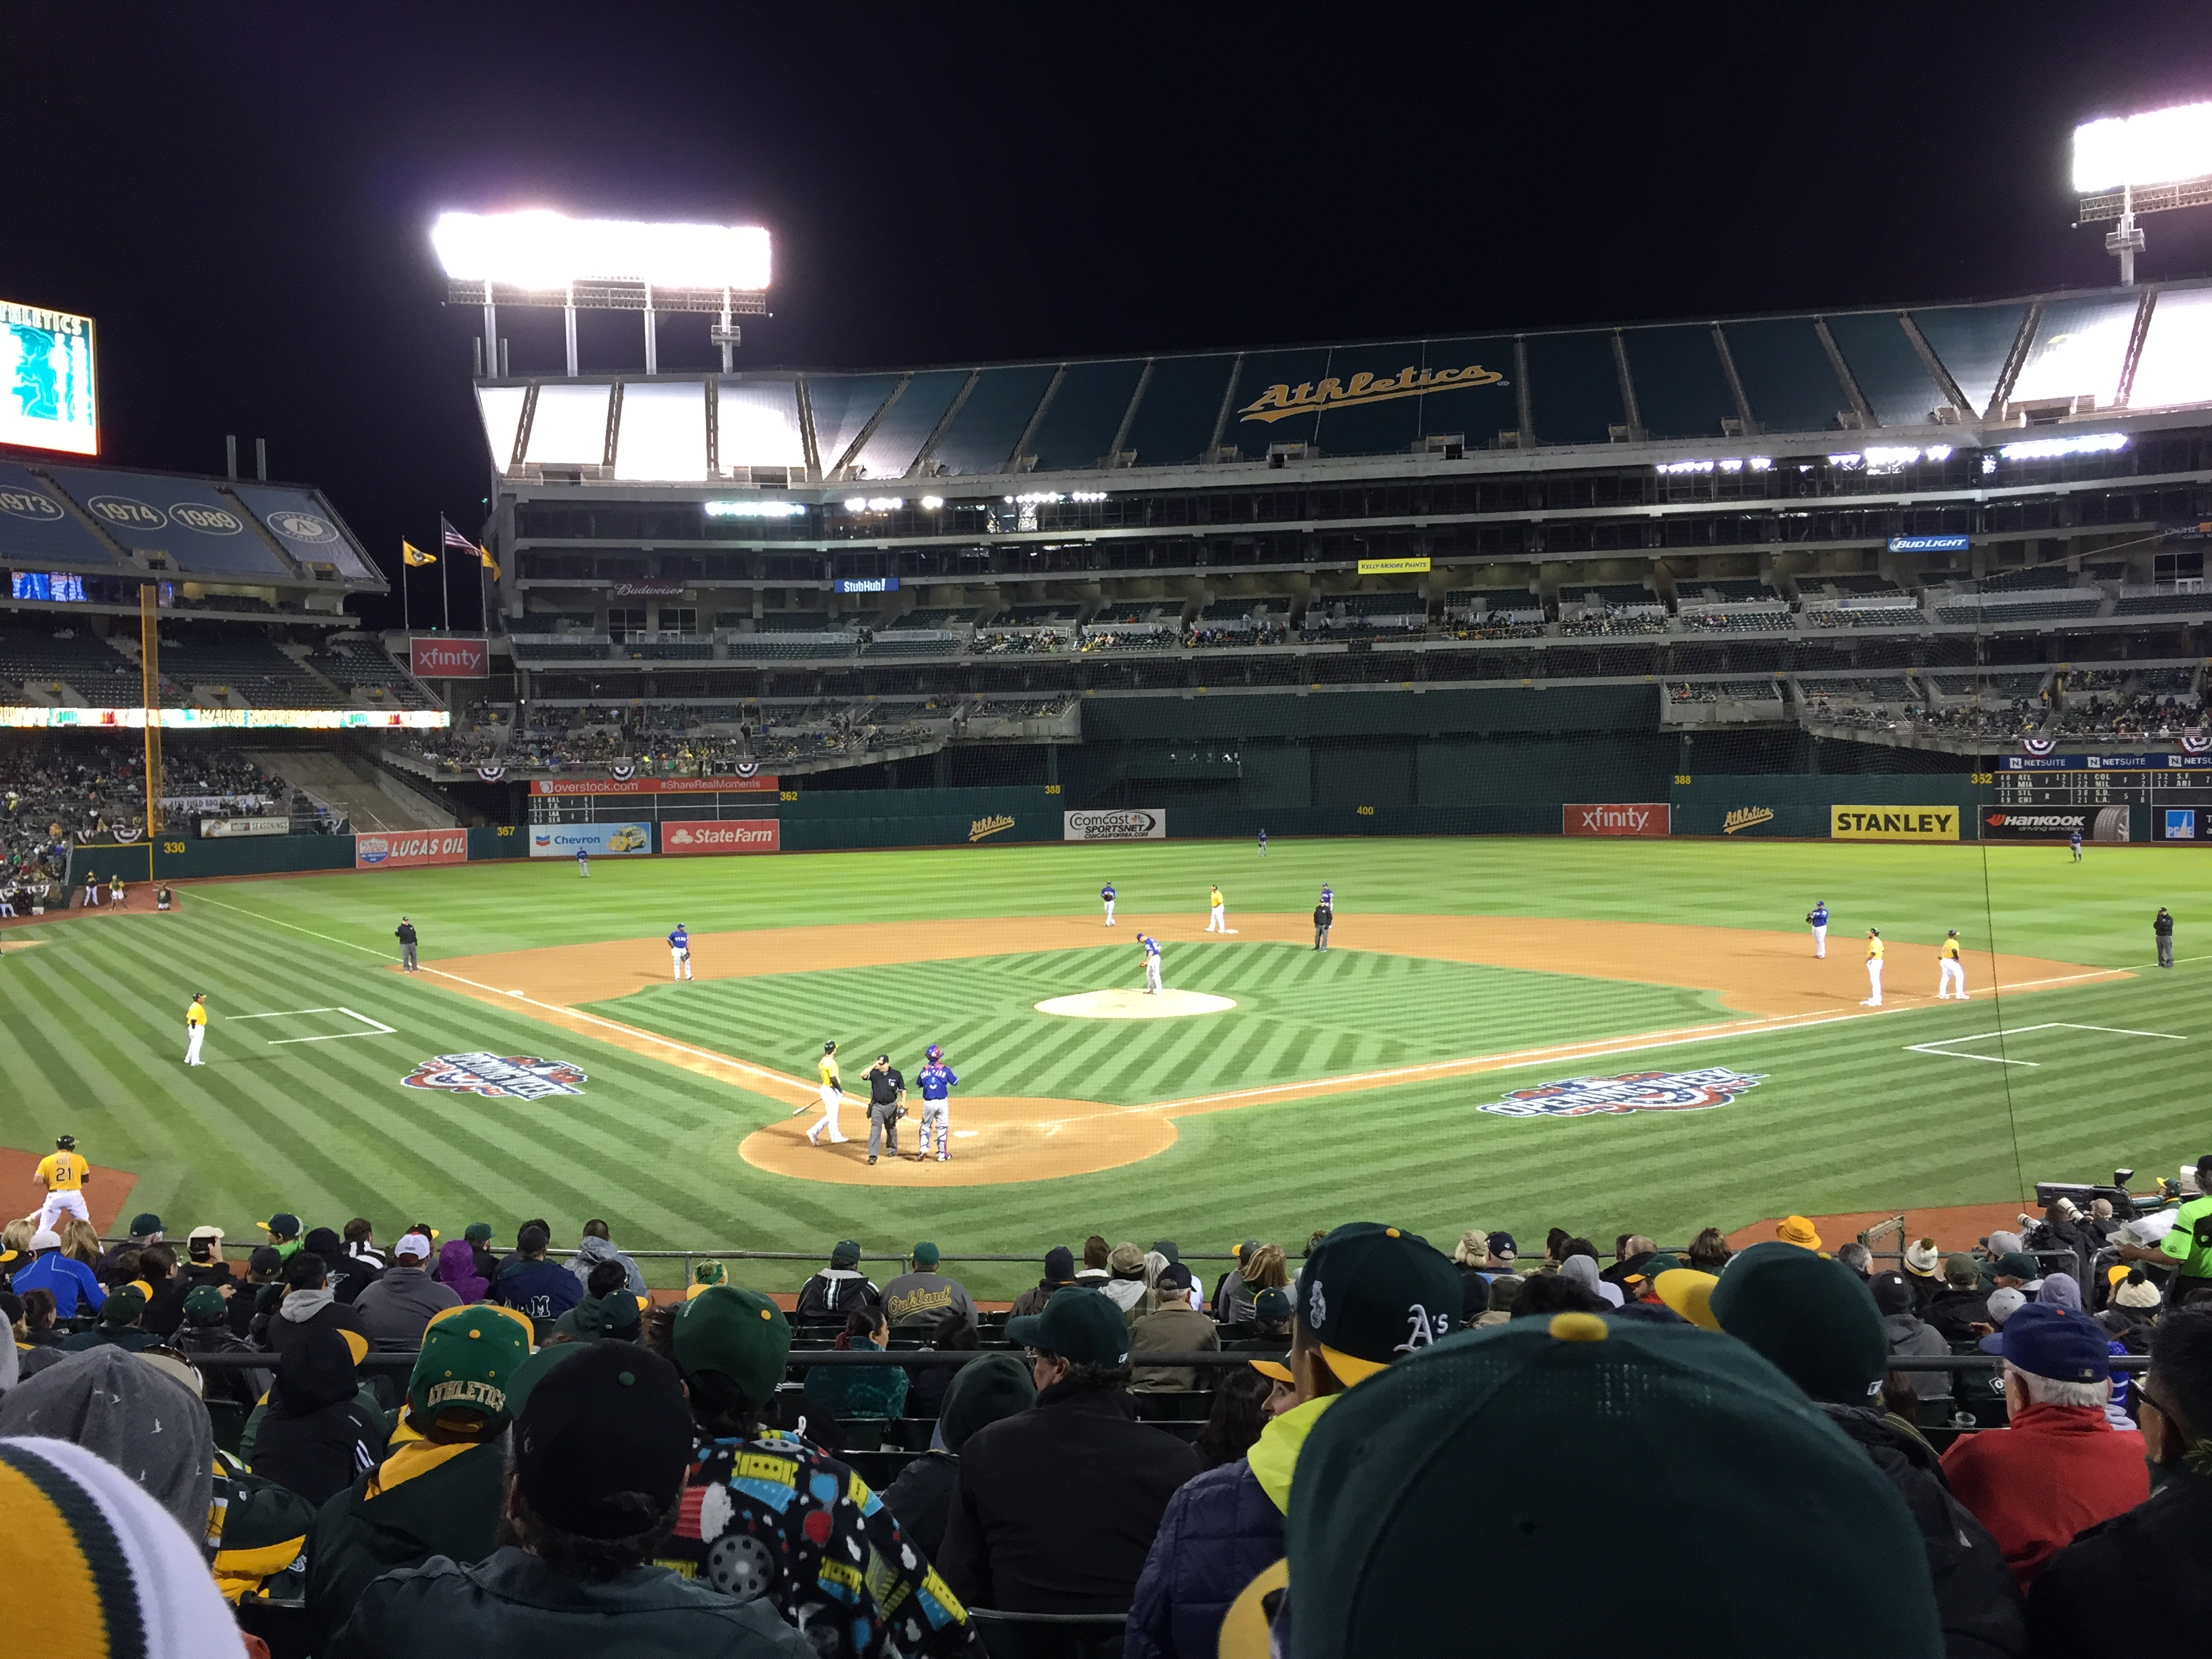 The A's will move to West Sacramento from Oakland starting in 2025